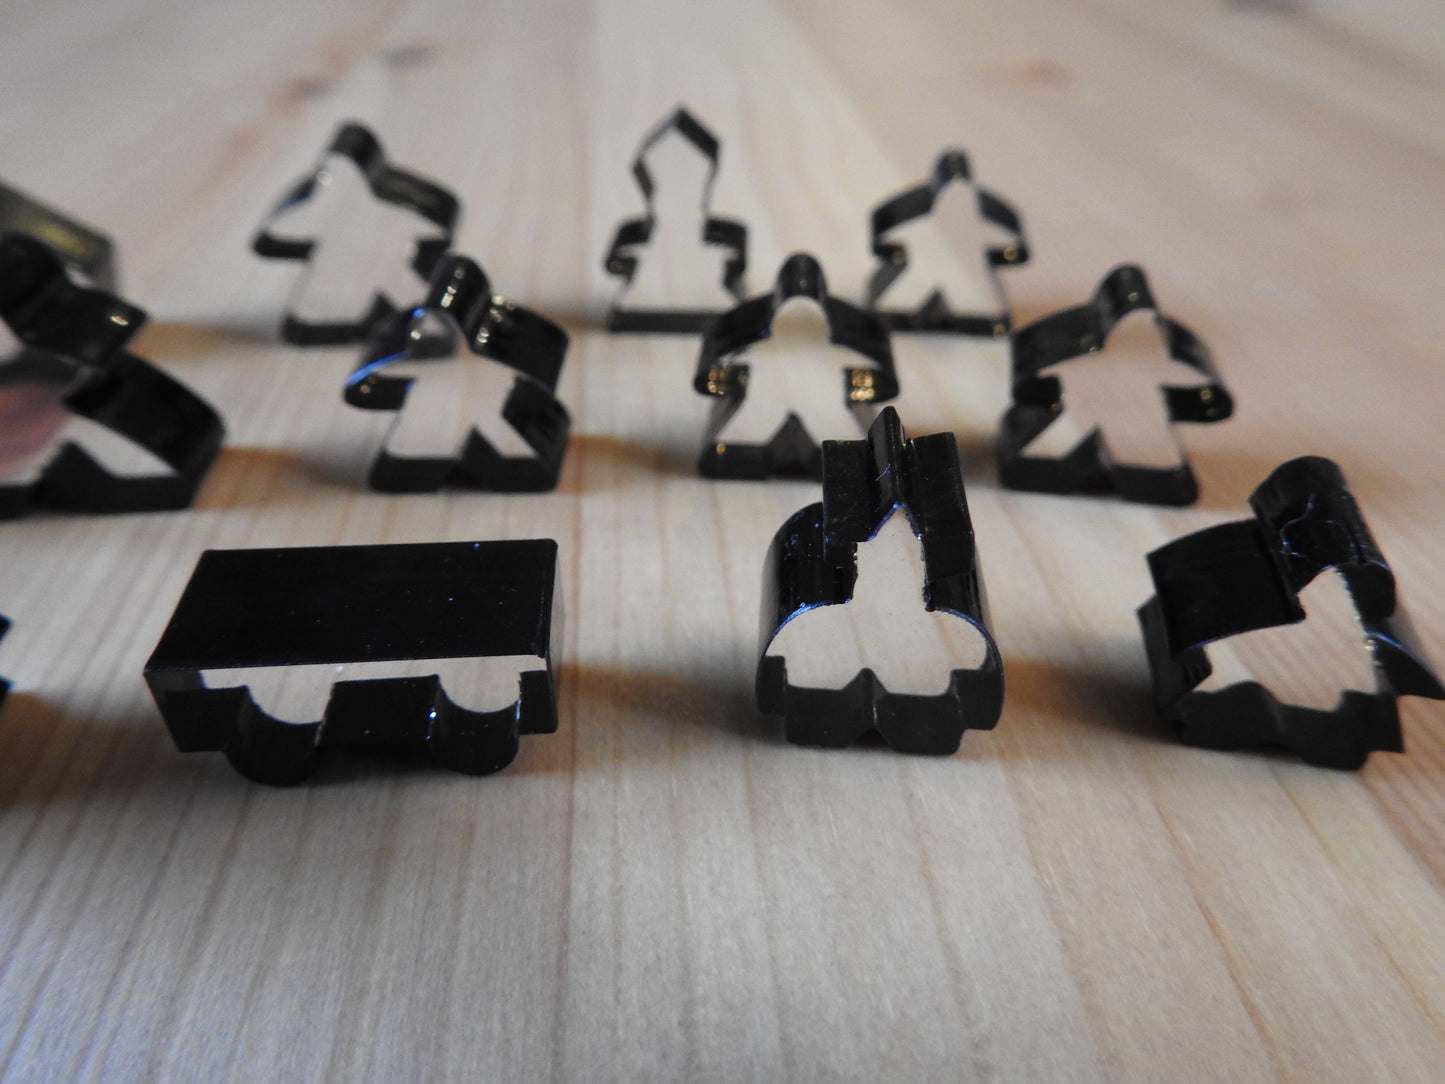 Another close-up view of meeple tokens such as the robber and messenger.